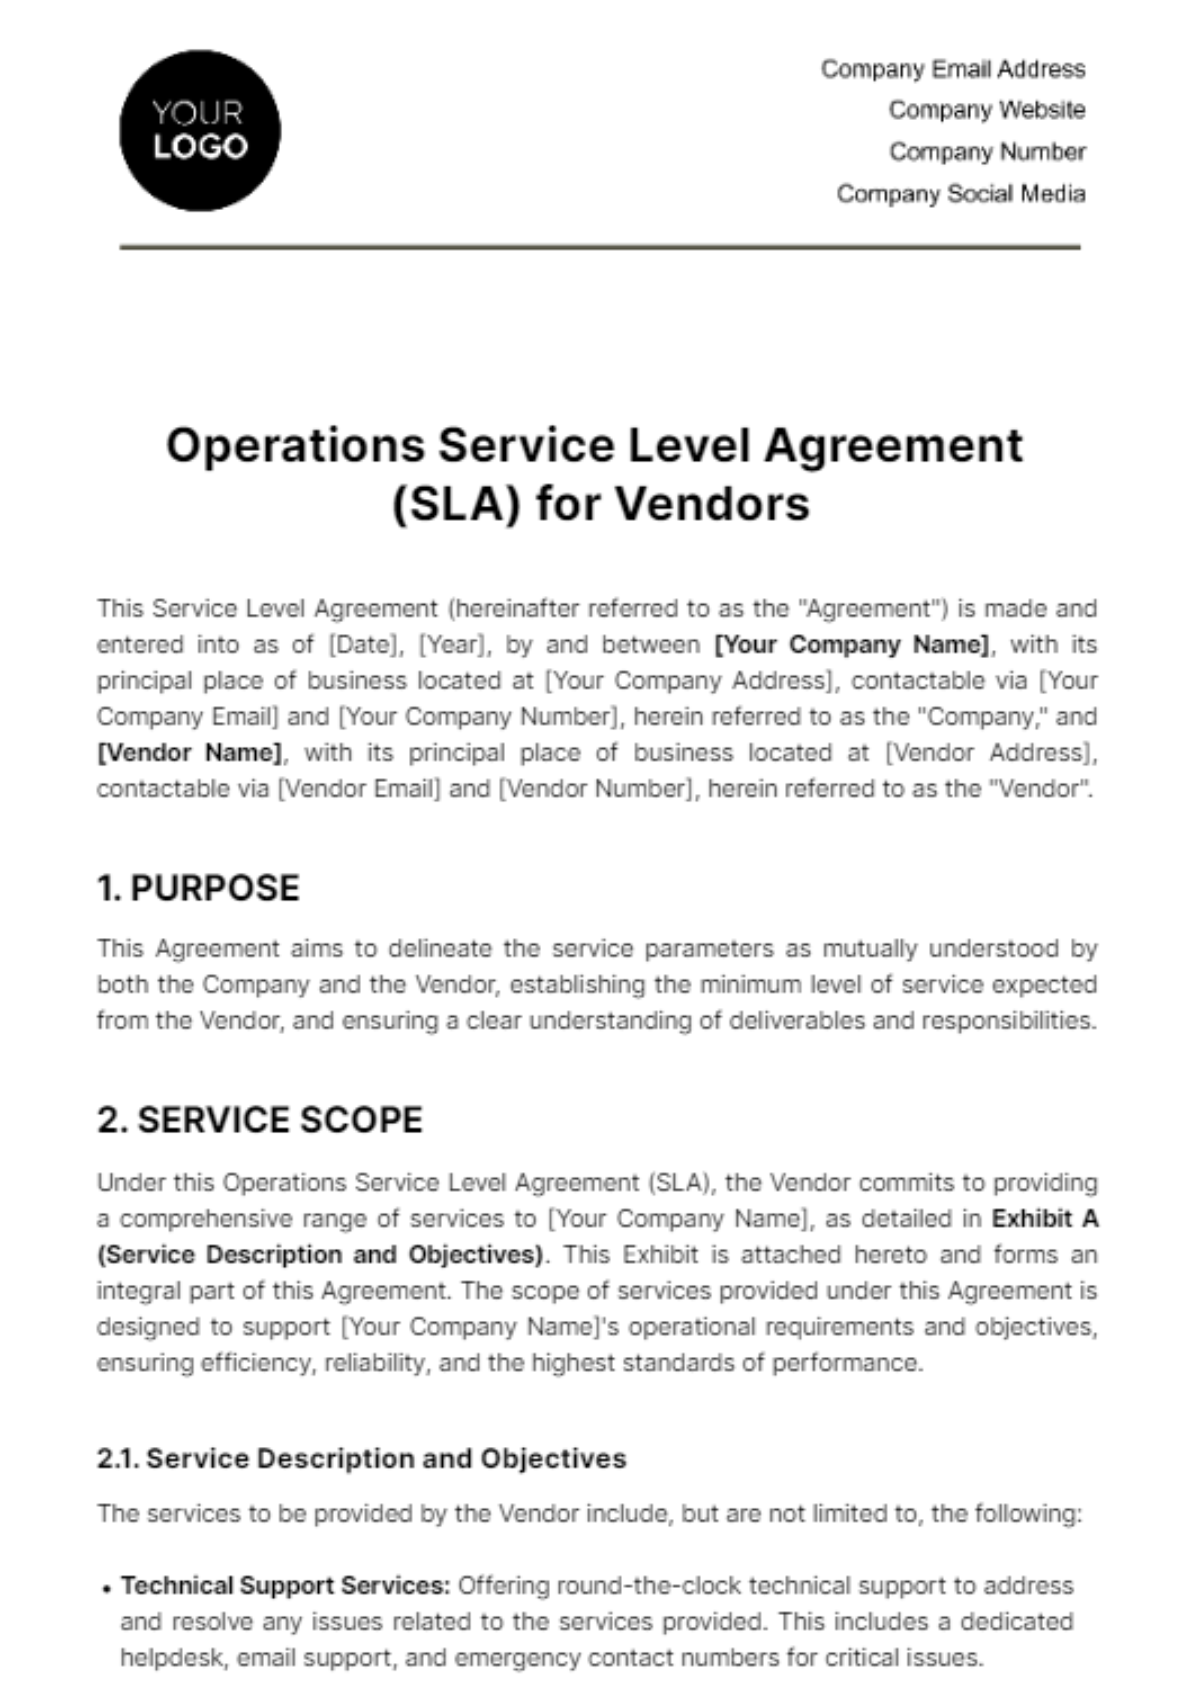 Operations Service Level Agreement (SLA) for Vendors Template